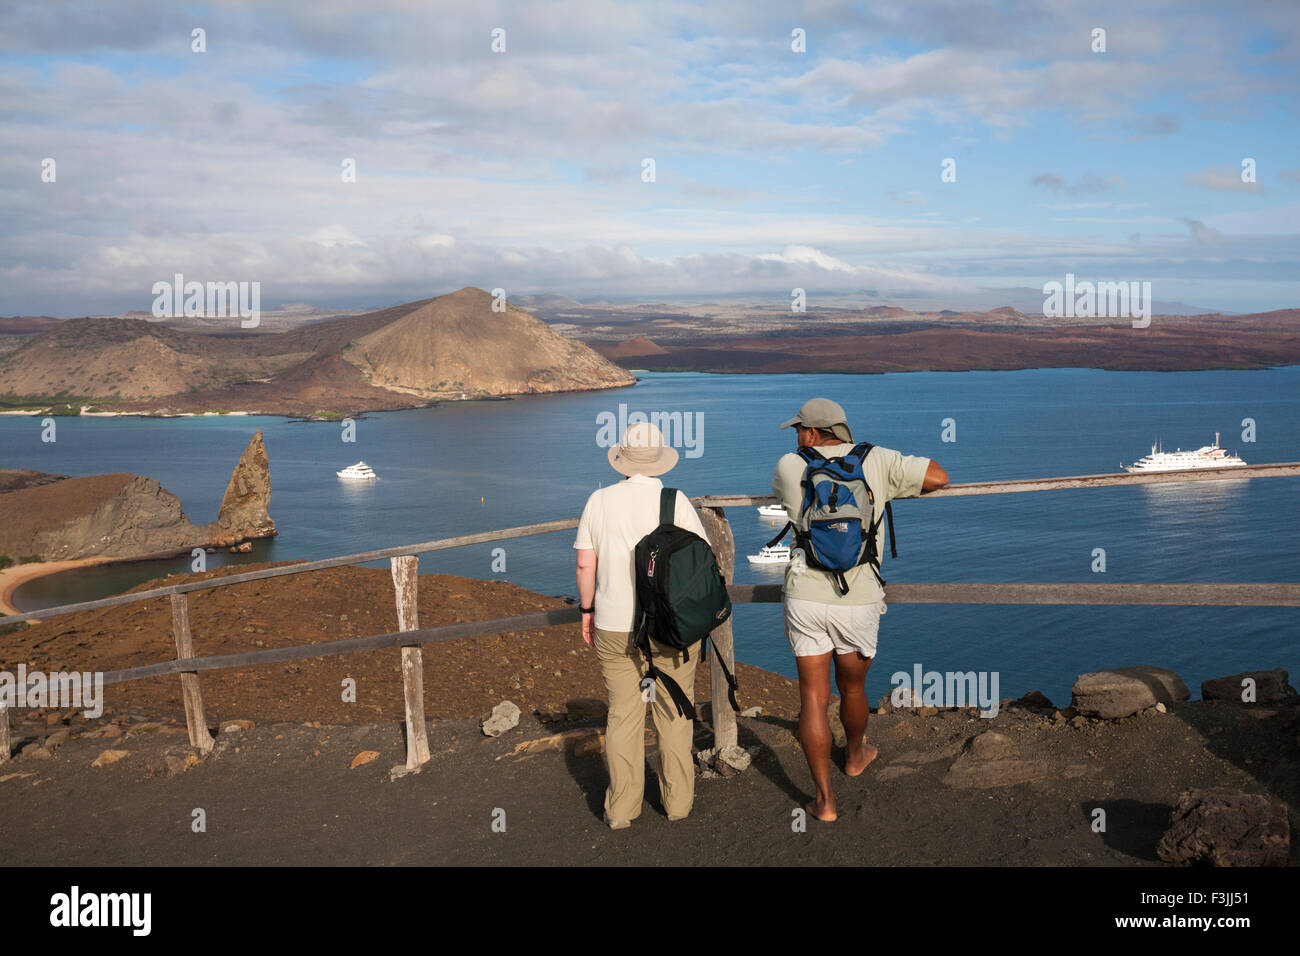 Admiring the landscape of Isla Bartolome the classic beauty spot of the Galapagos, Ecuador in September Stock Photo